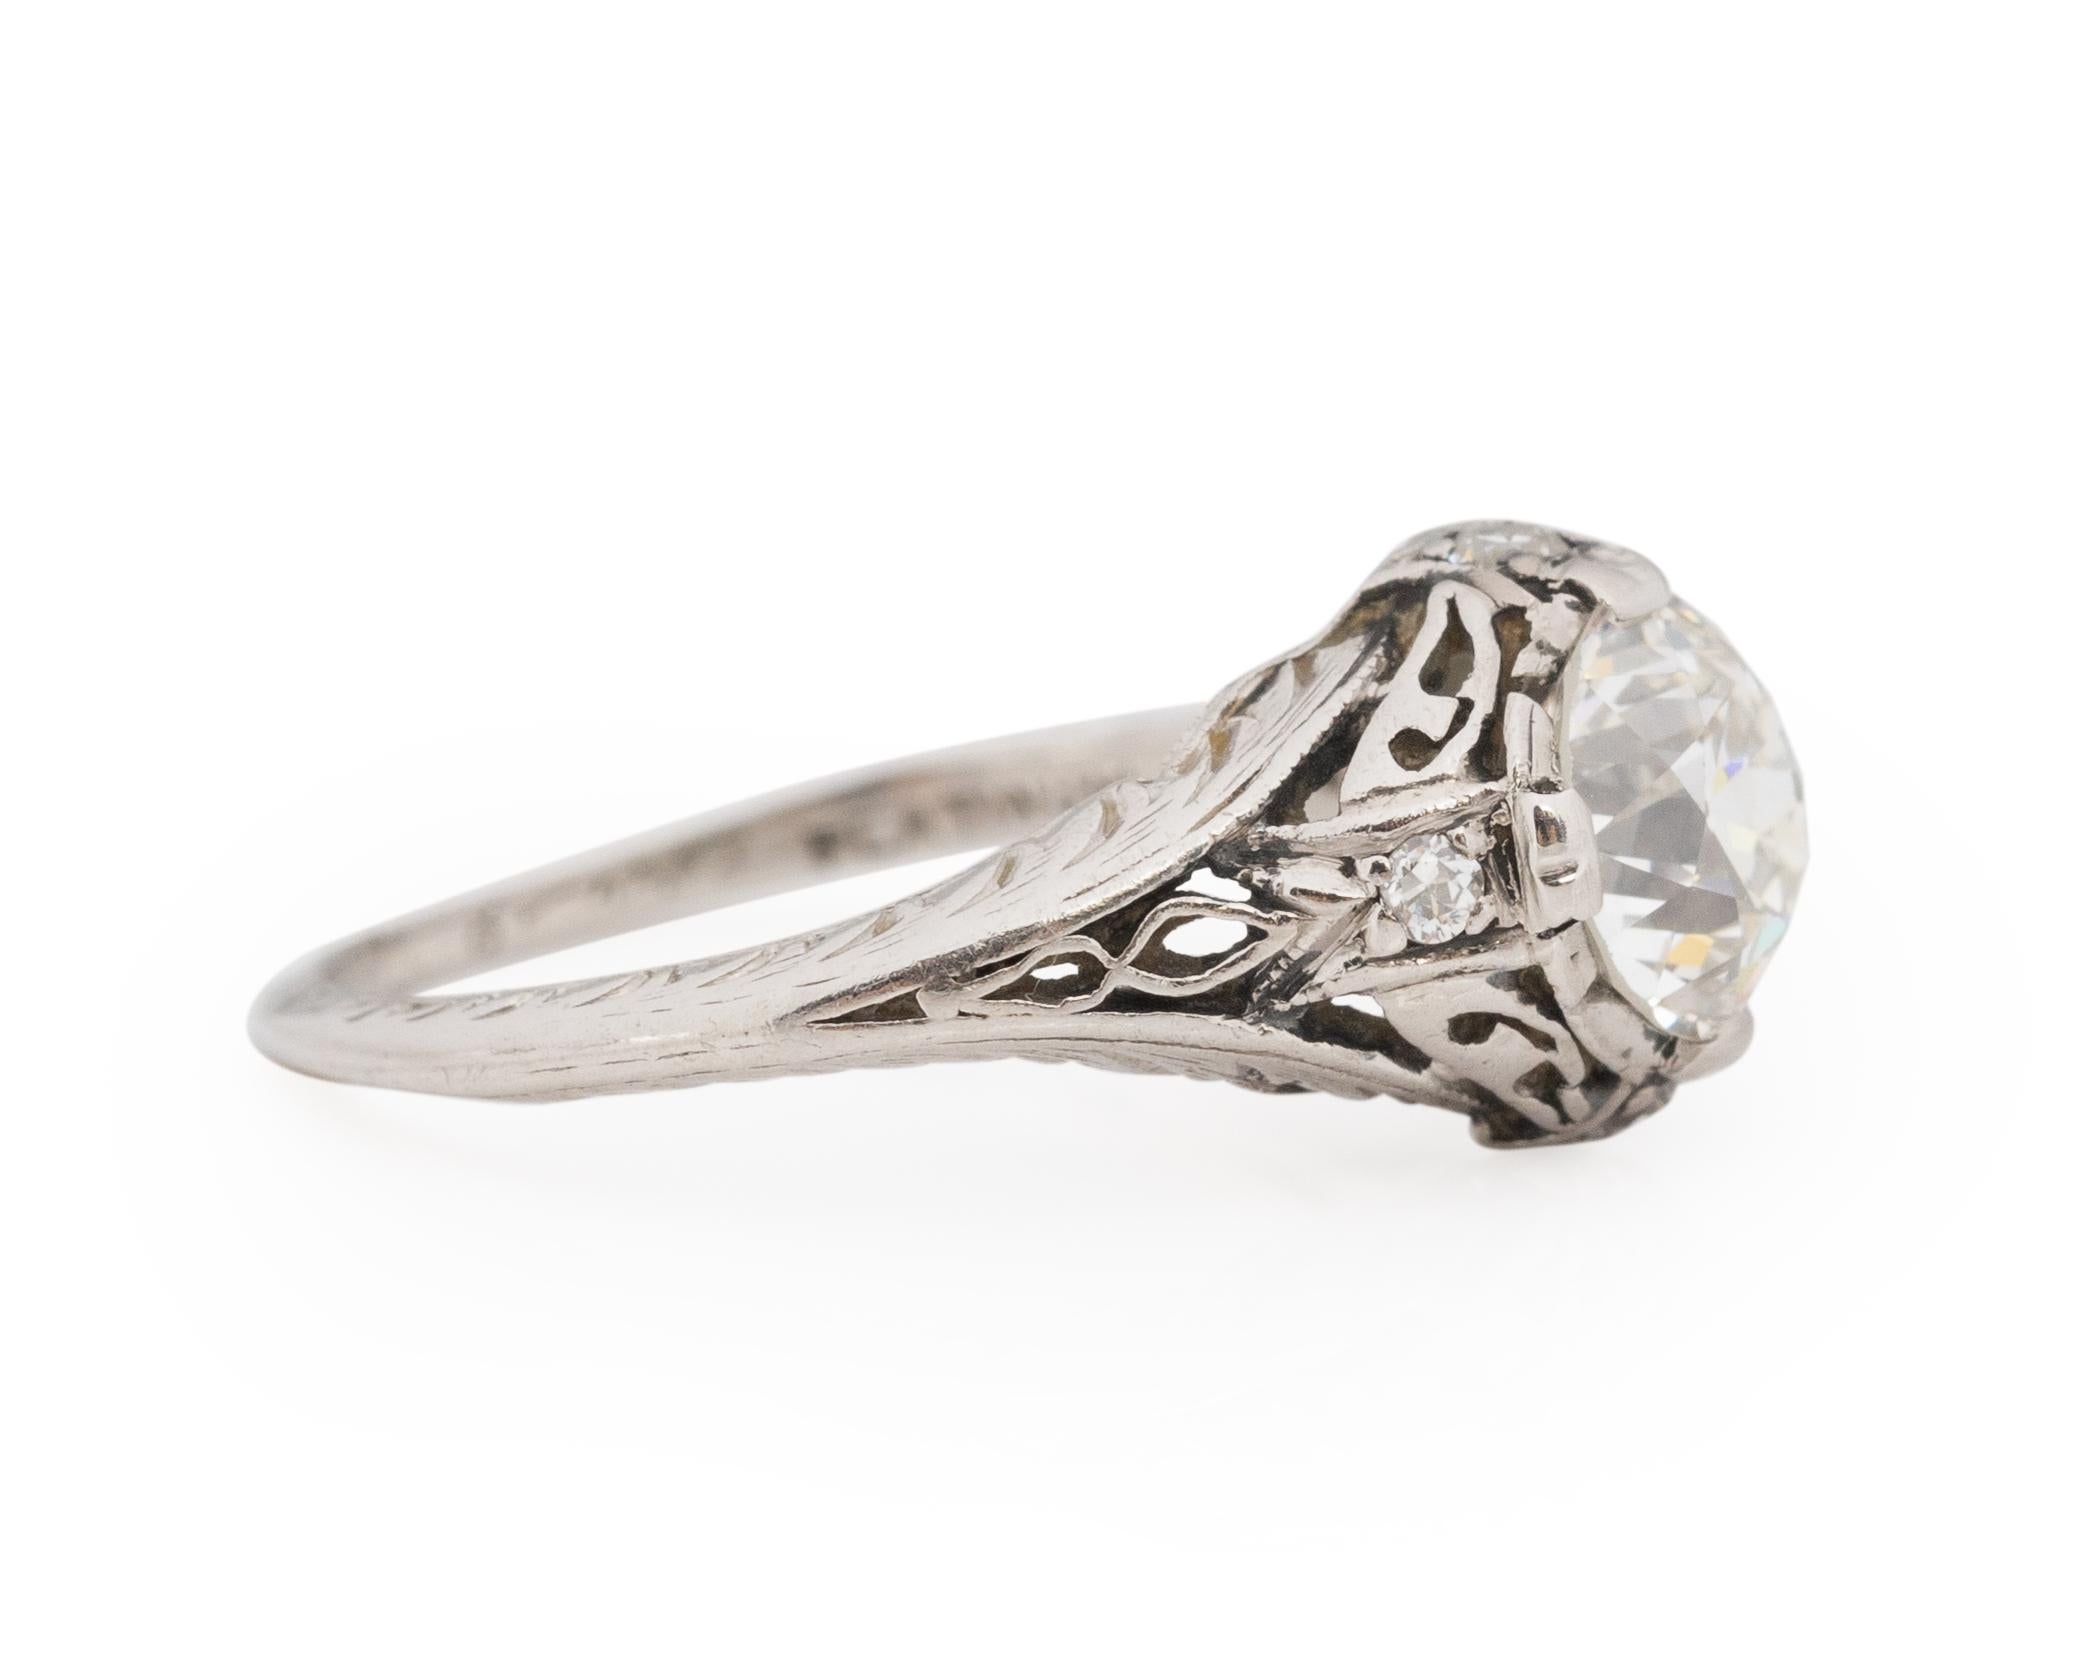 Ring Size: 4.5
Metal Type: Platinum [Hallmarked, and Tested]
Weight: 3.4 grams

Center Diamond Details:
GIA REPORT #: 6224139210
Weight: 1.02ct
Cut: Old European brilliant
Color: I
Clarity: SI1
Measurements: 6.30mm x 6.20mm x 4.17mm

Side Stone